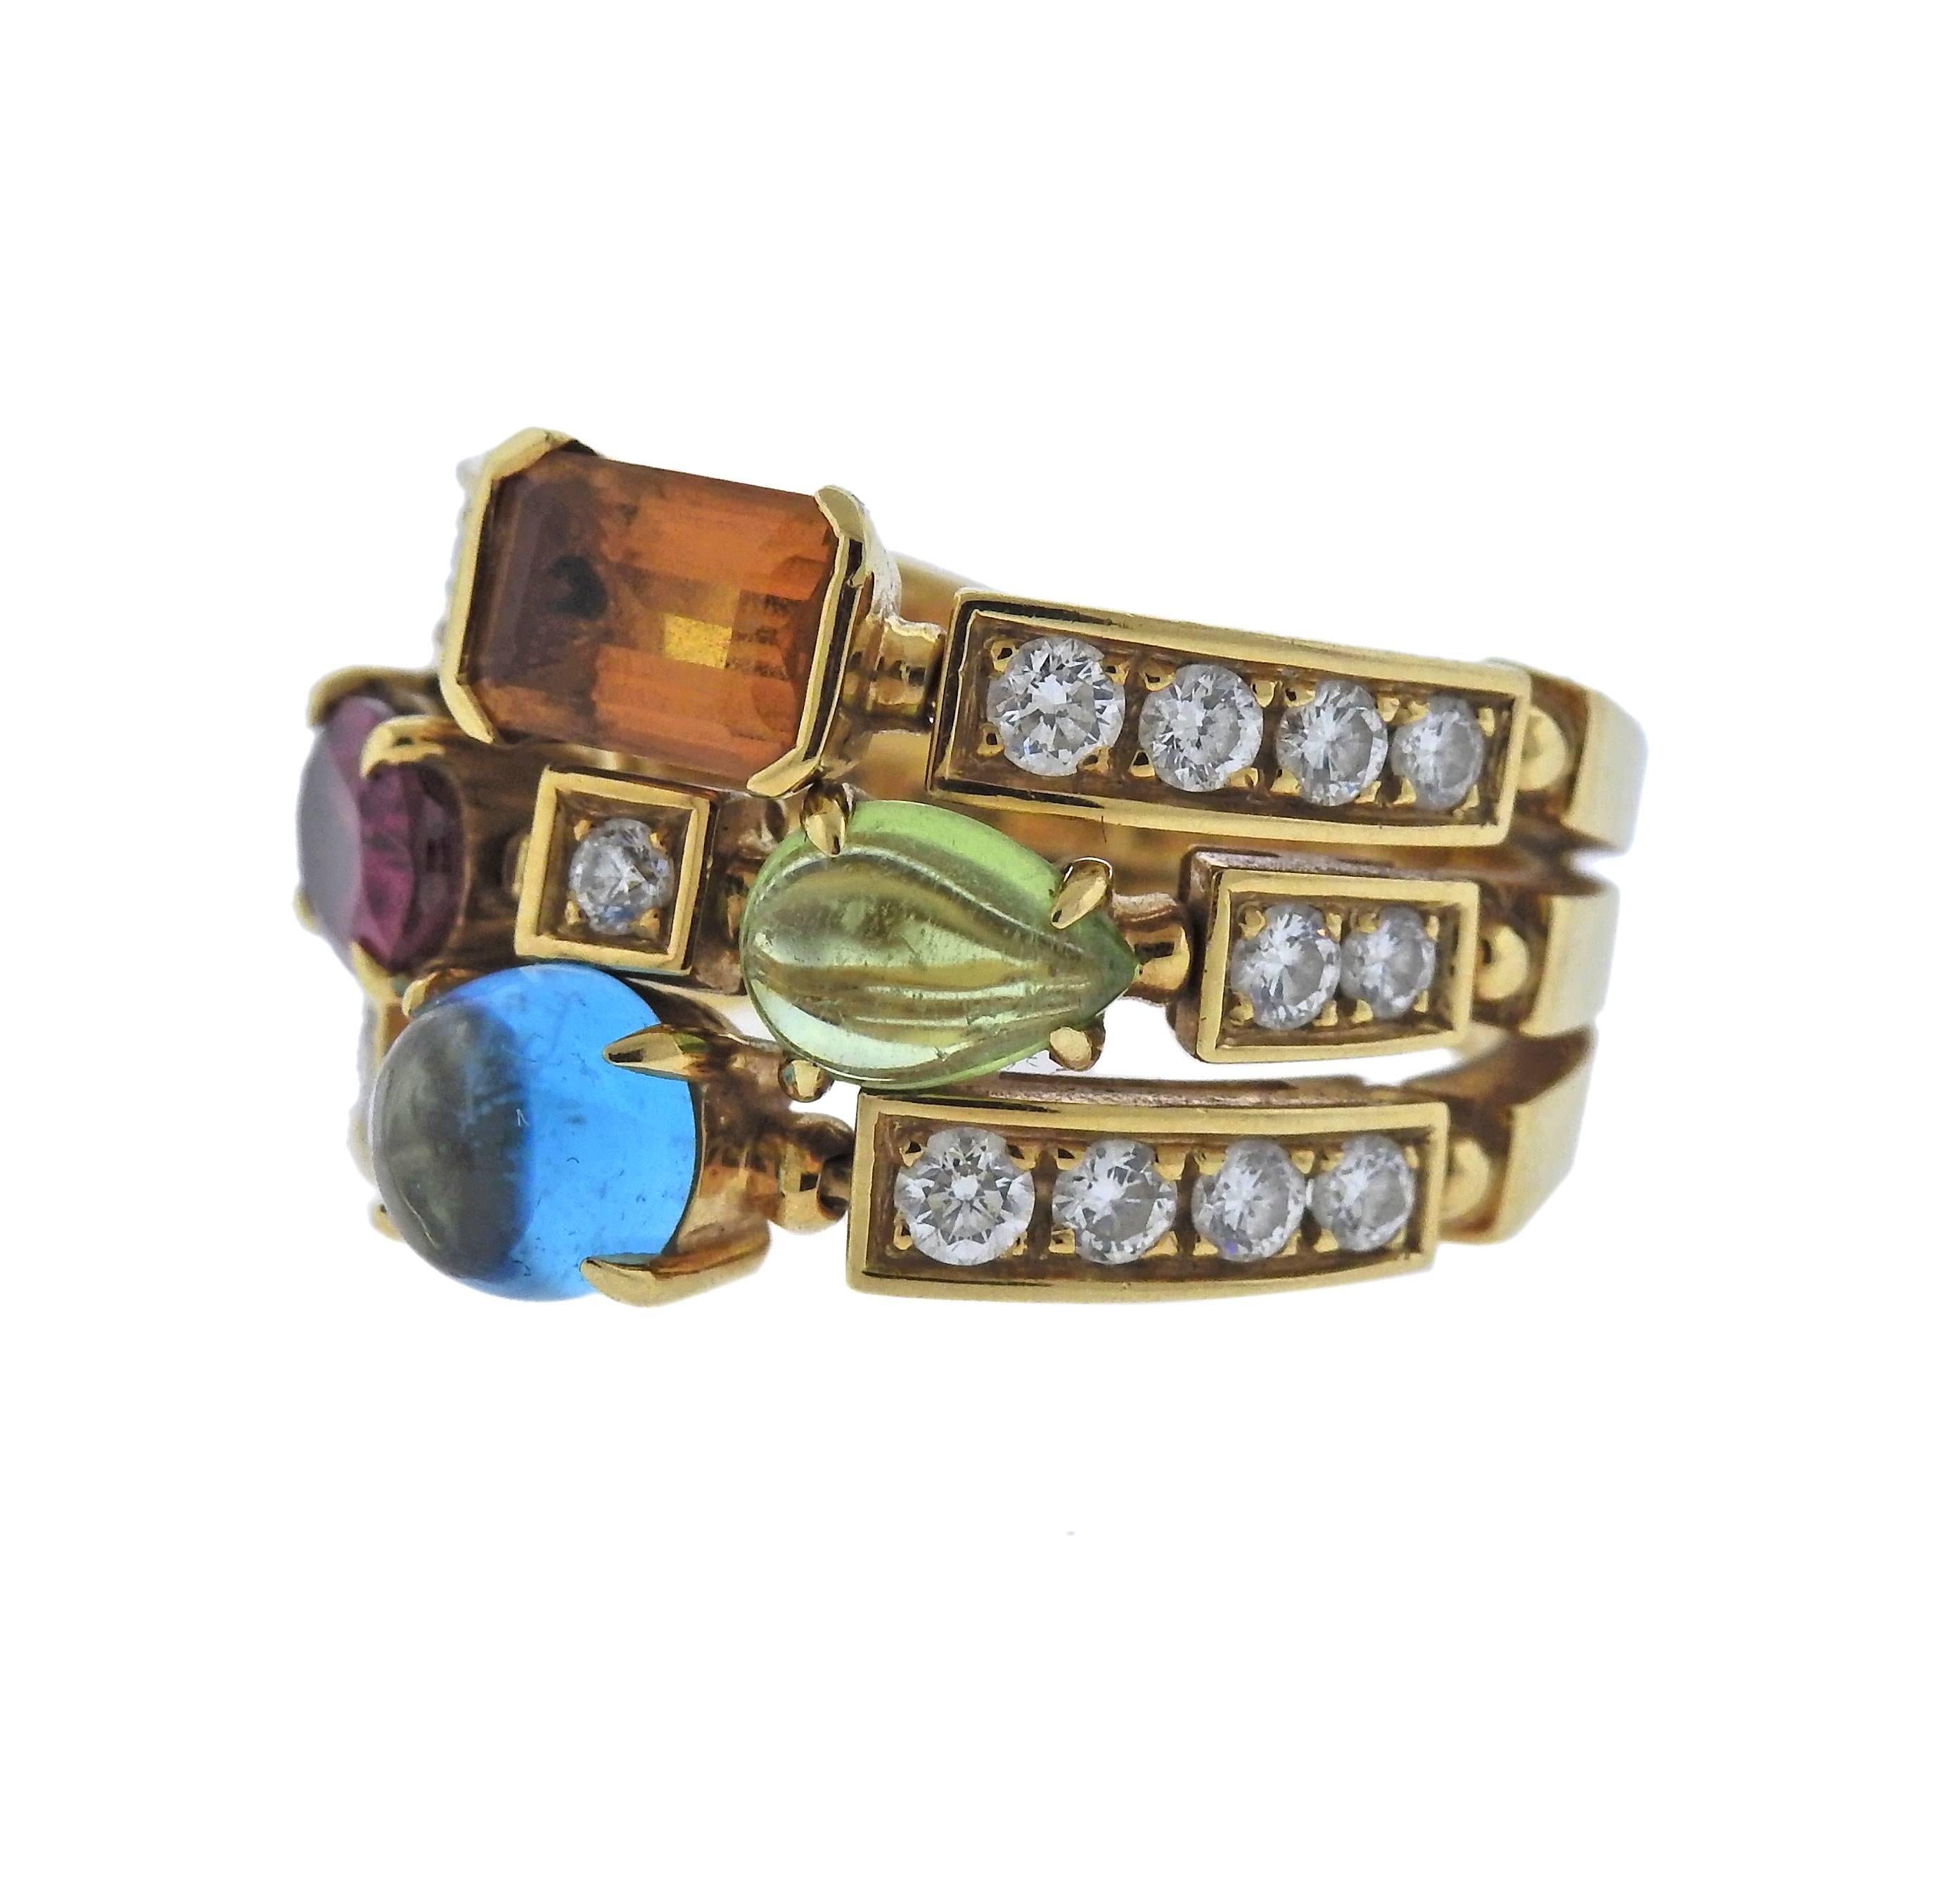 18k yellow gold Allegra ring by Bulgari, set with approx. 0.70ctw in diamonds, peridot, citrine, topaz and tourmaline gemstones. Ring size - 6 1/2, ring top is 17mm wide, weighs 12.4 grams.